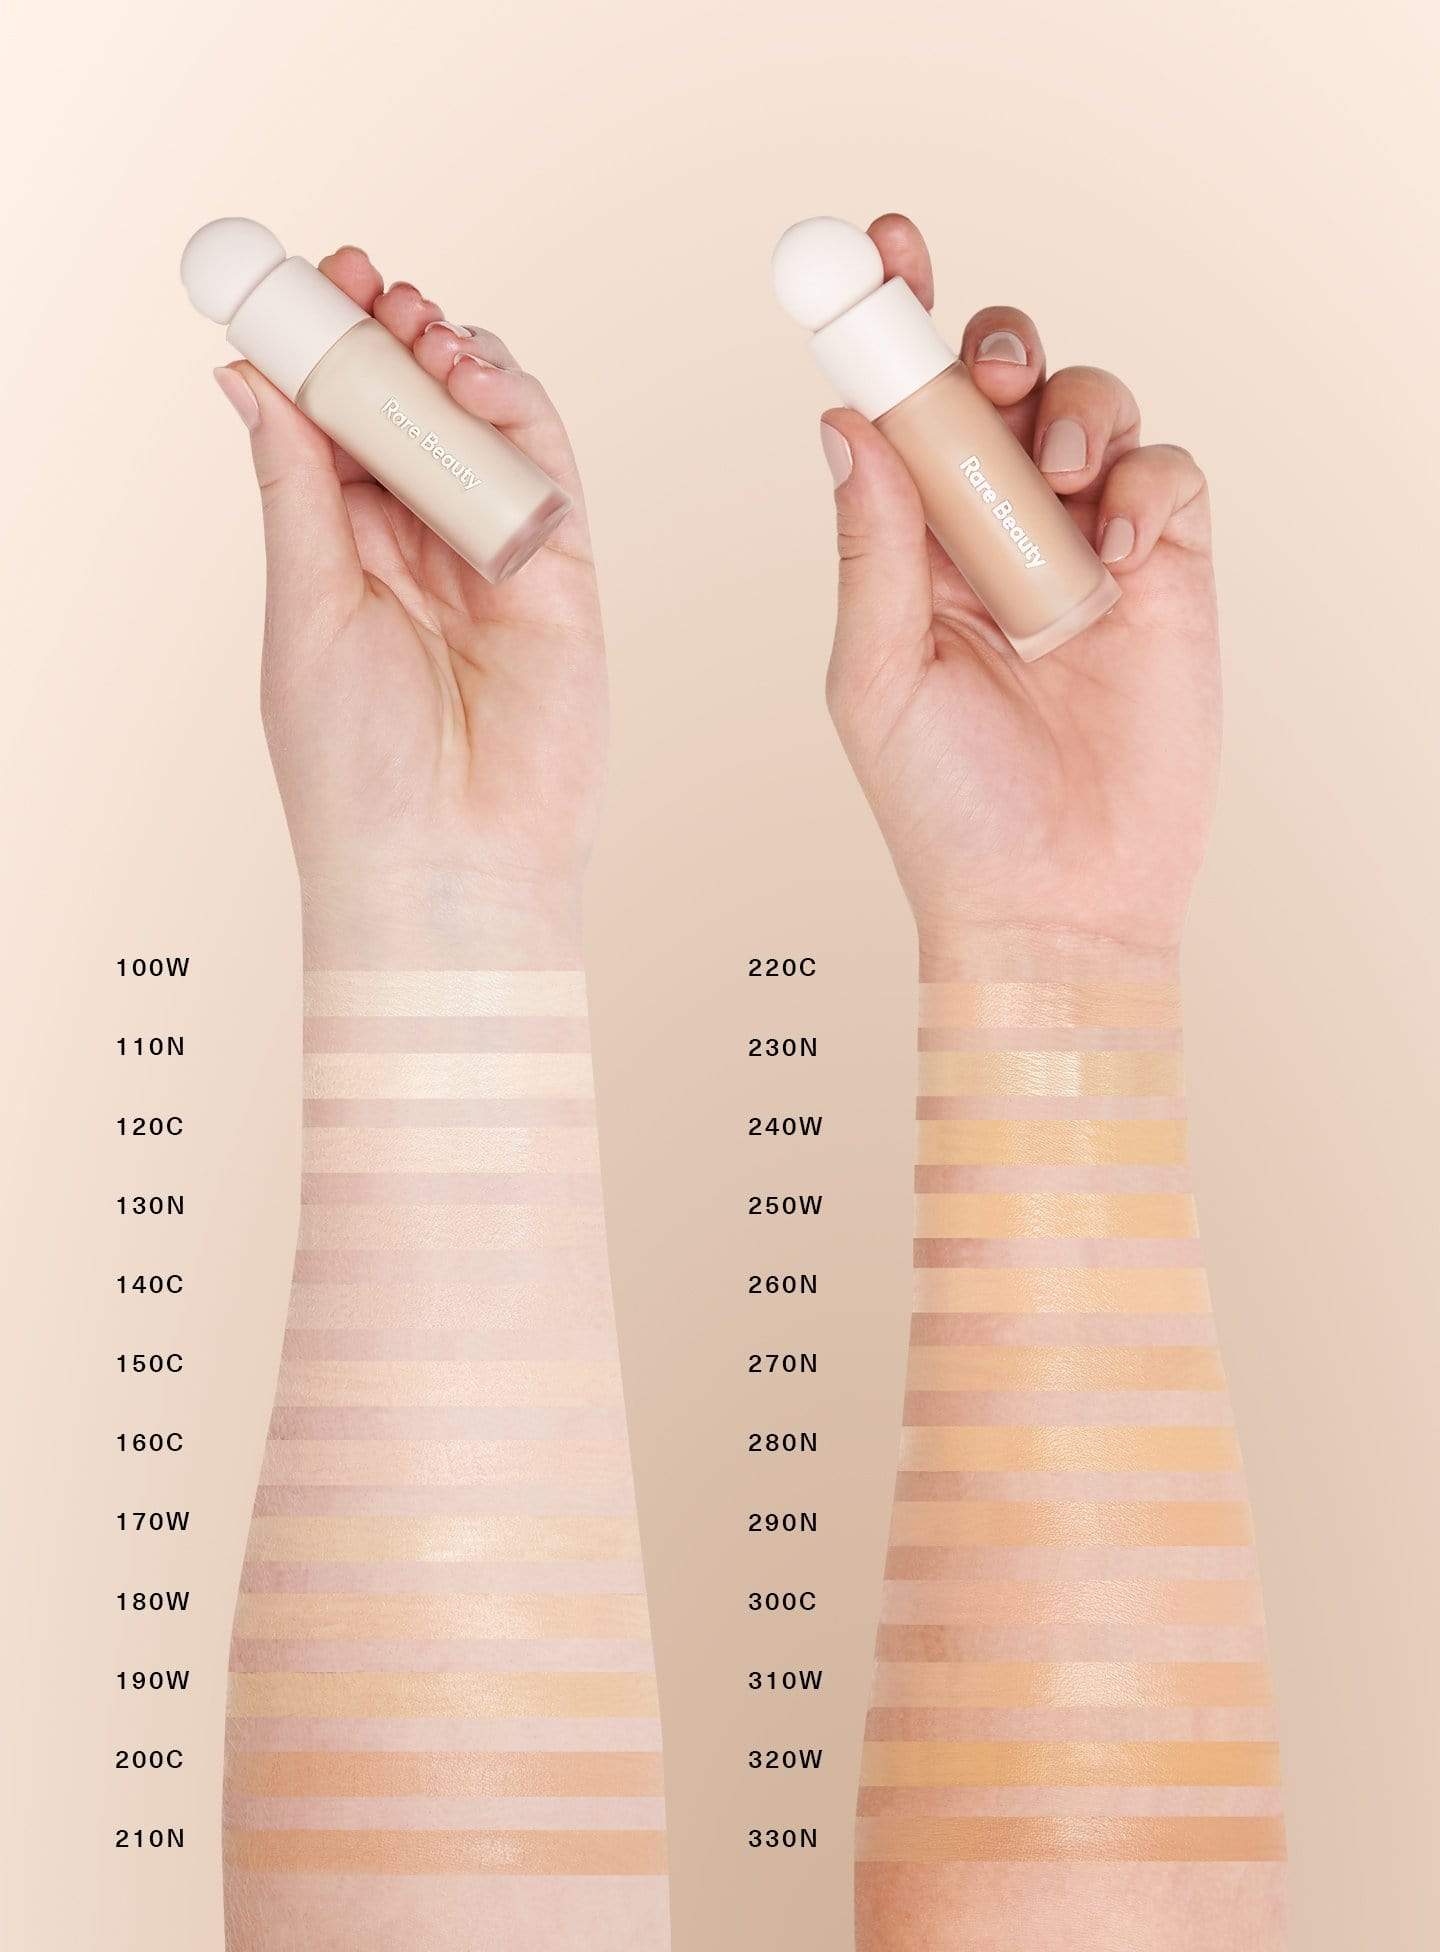 Rare Beauty Brightening Concealer Swatches Online Buying